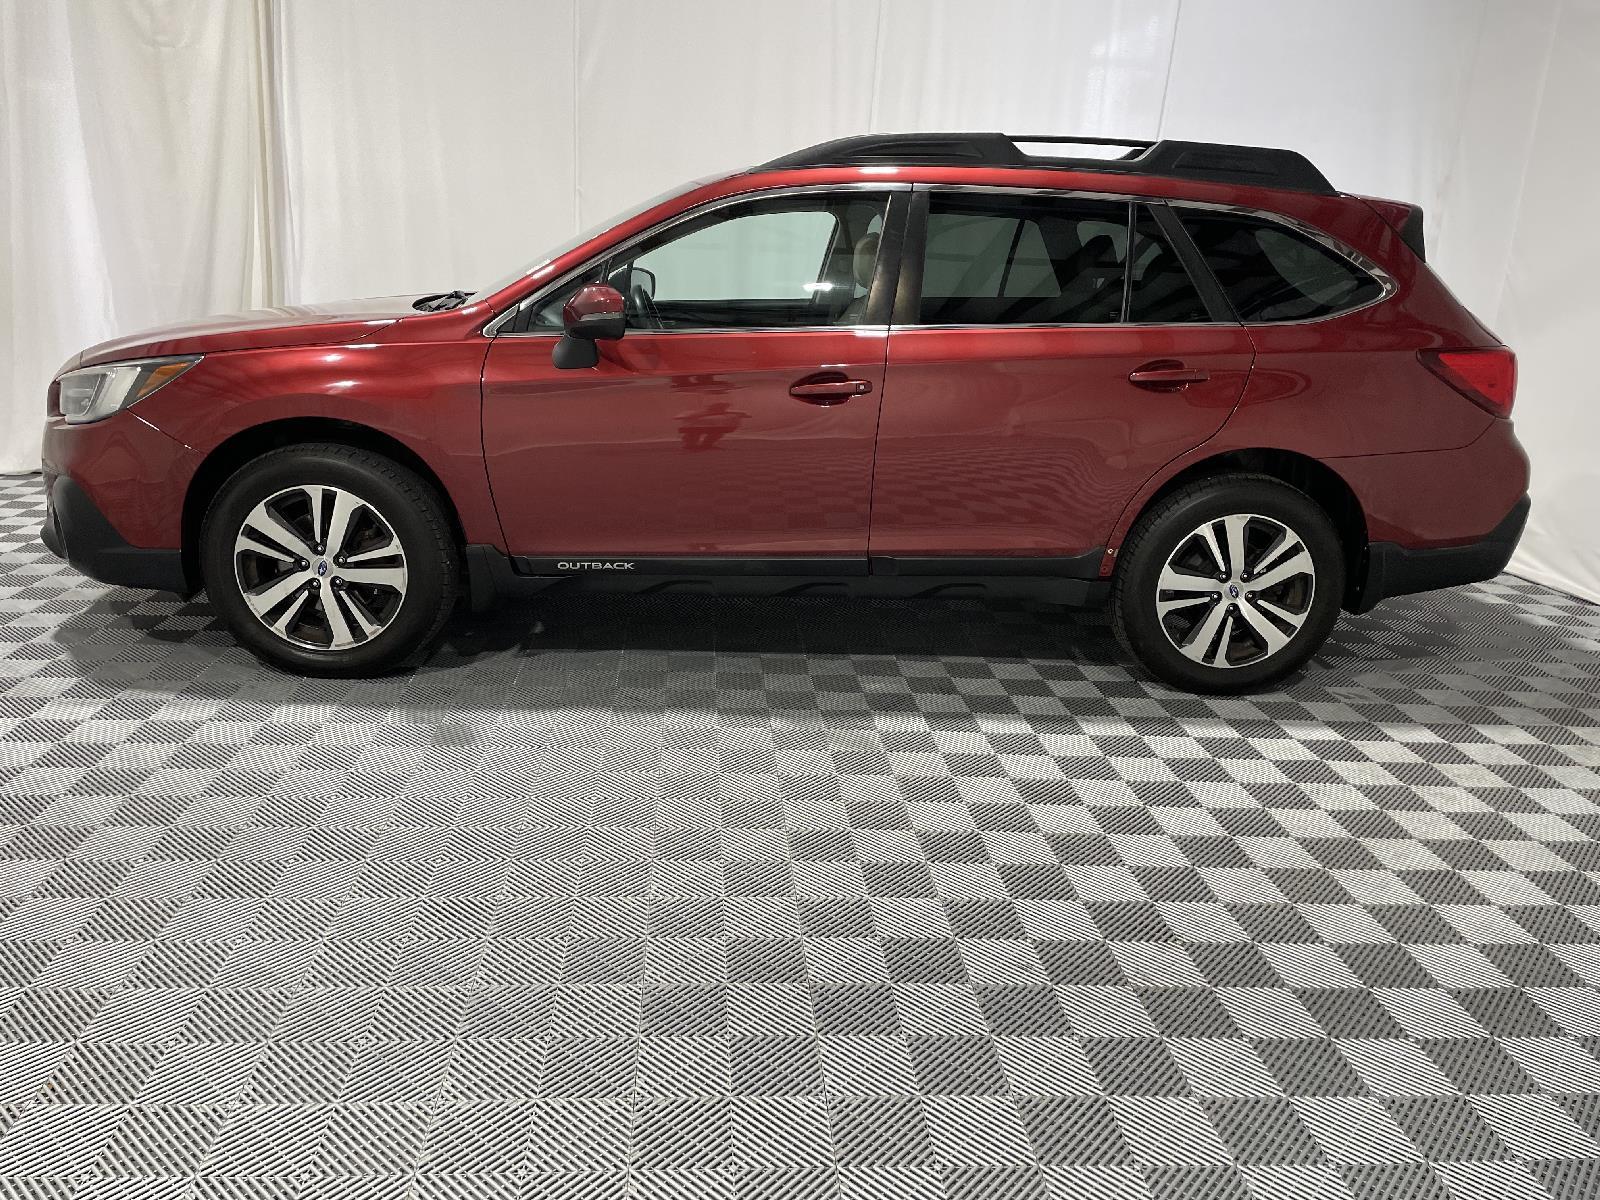 Used 2019 Subaru Outback Limited SUV for sale in St Joseph MO